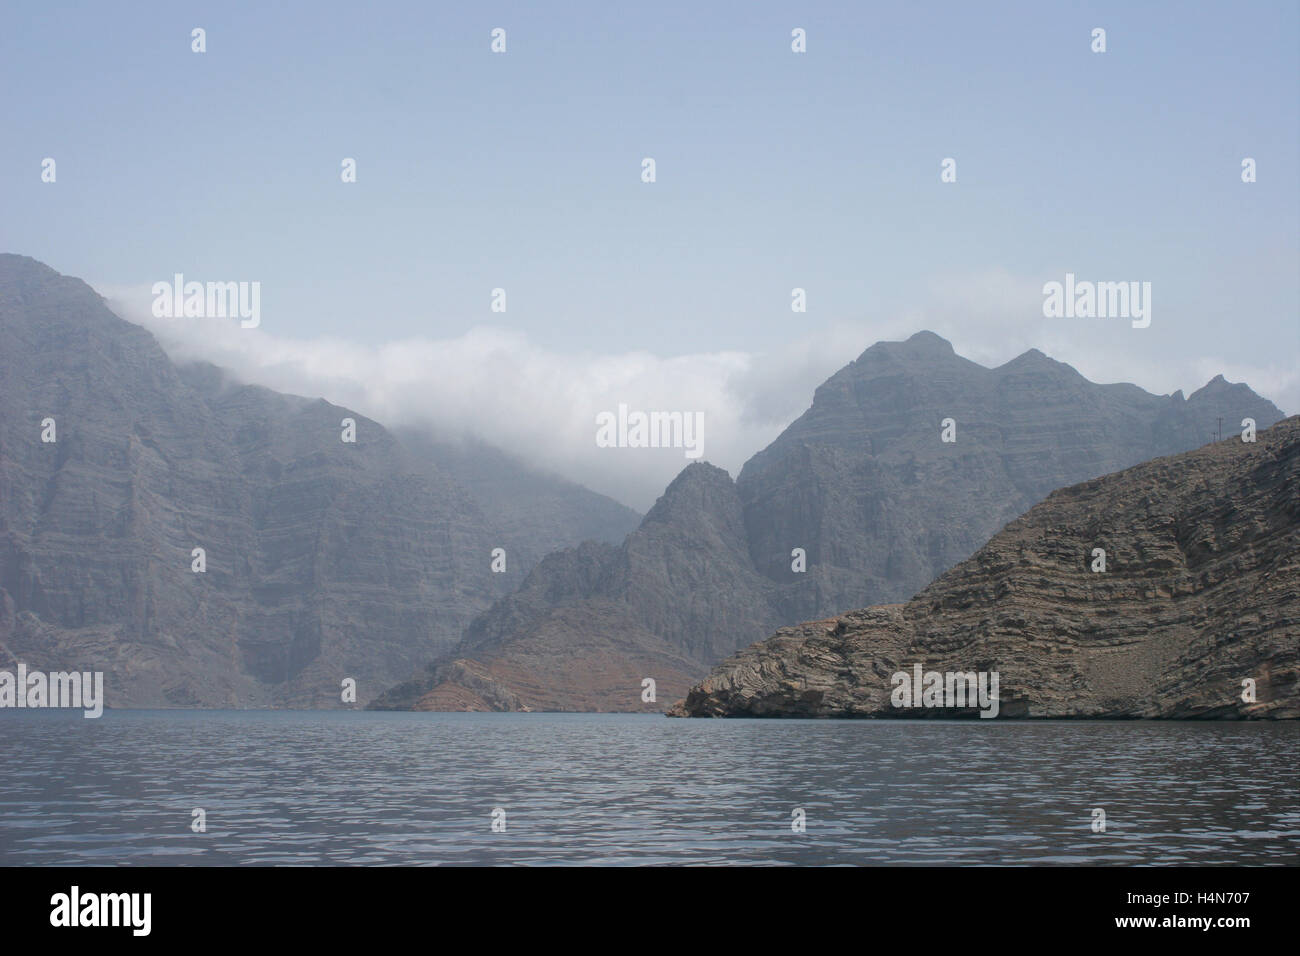 The wild landscape and cliffs of the Musandam Peninsular in northern Oman viewed from the Gulf of Oman Stock Photo